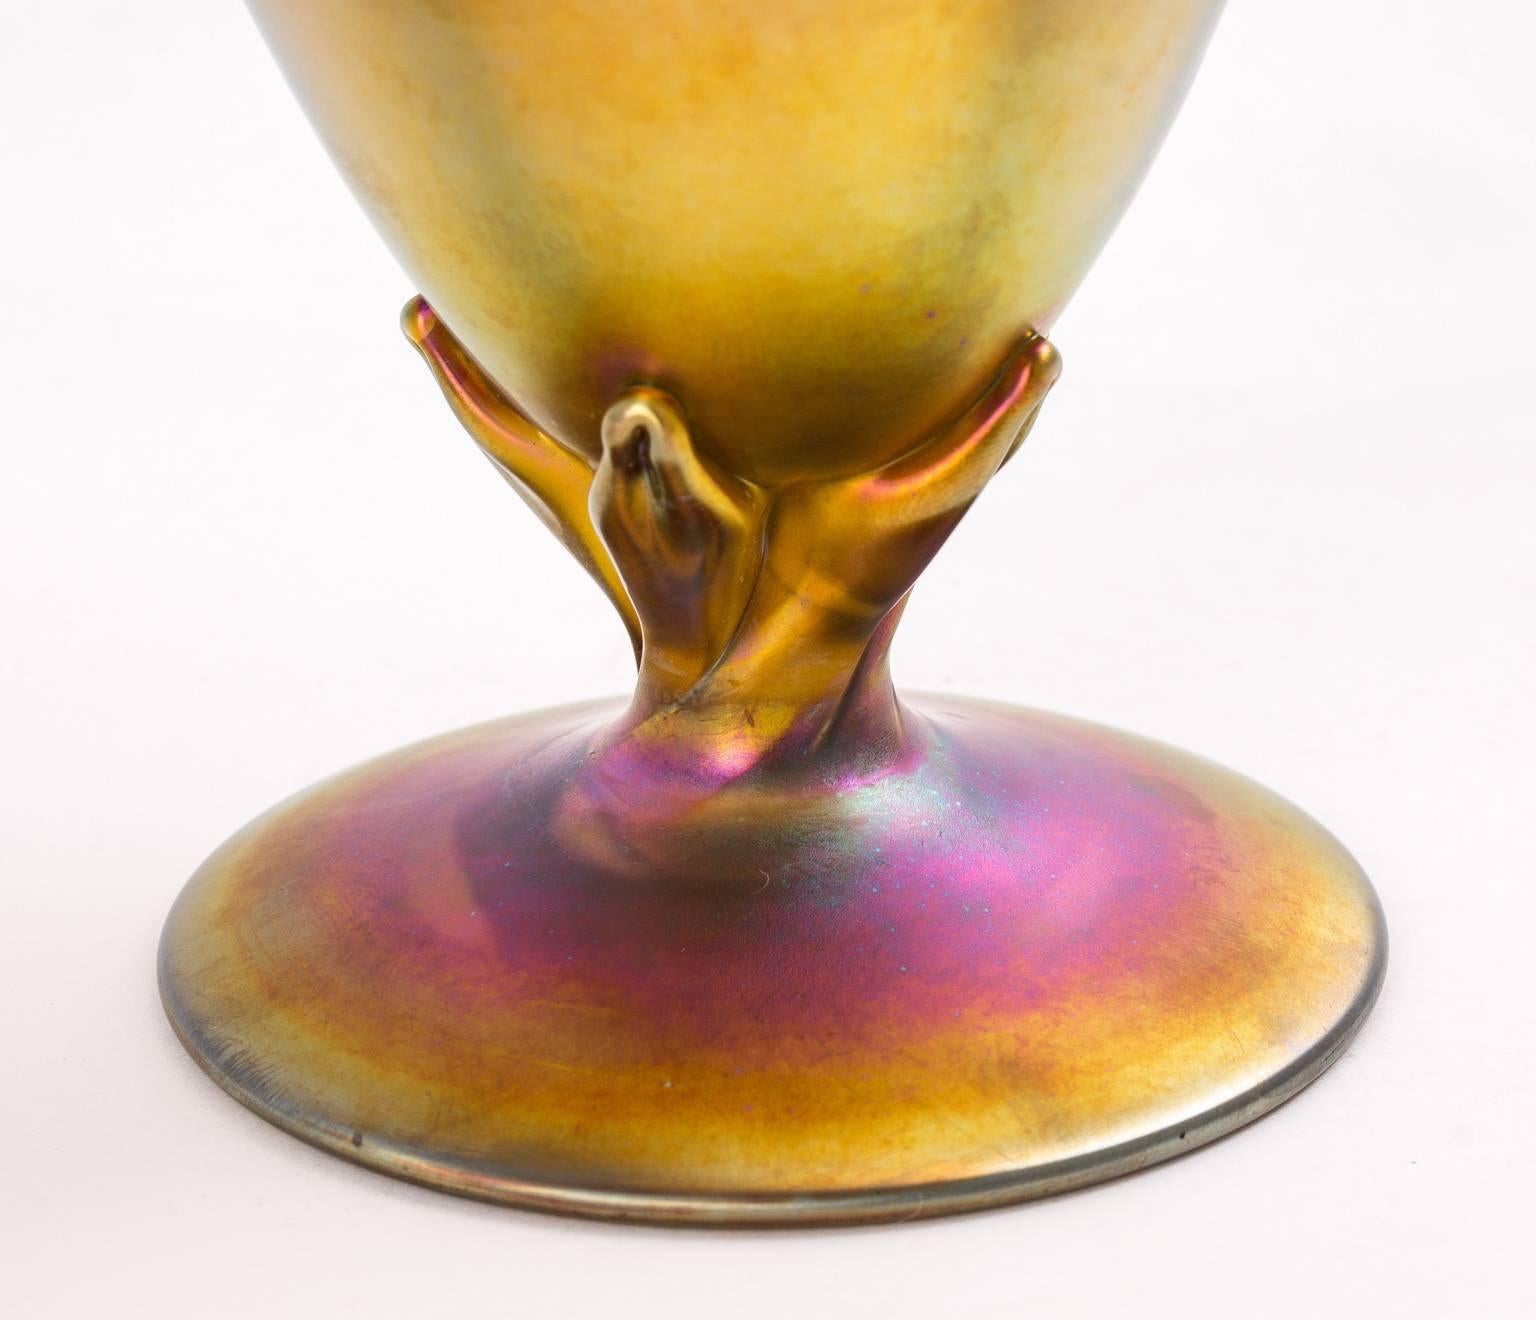 Louis comfort Tiffany favrile vase. Tiffany's iridescent first came in to production at the end of the 19th century. Signed.